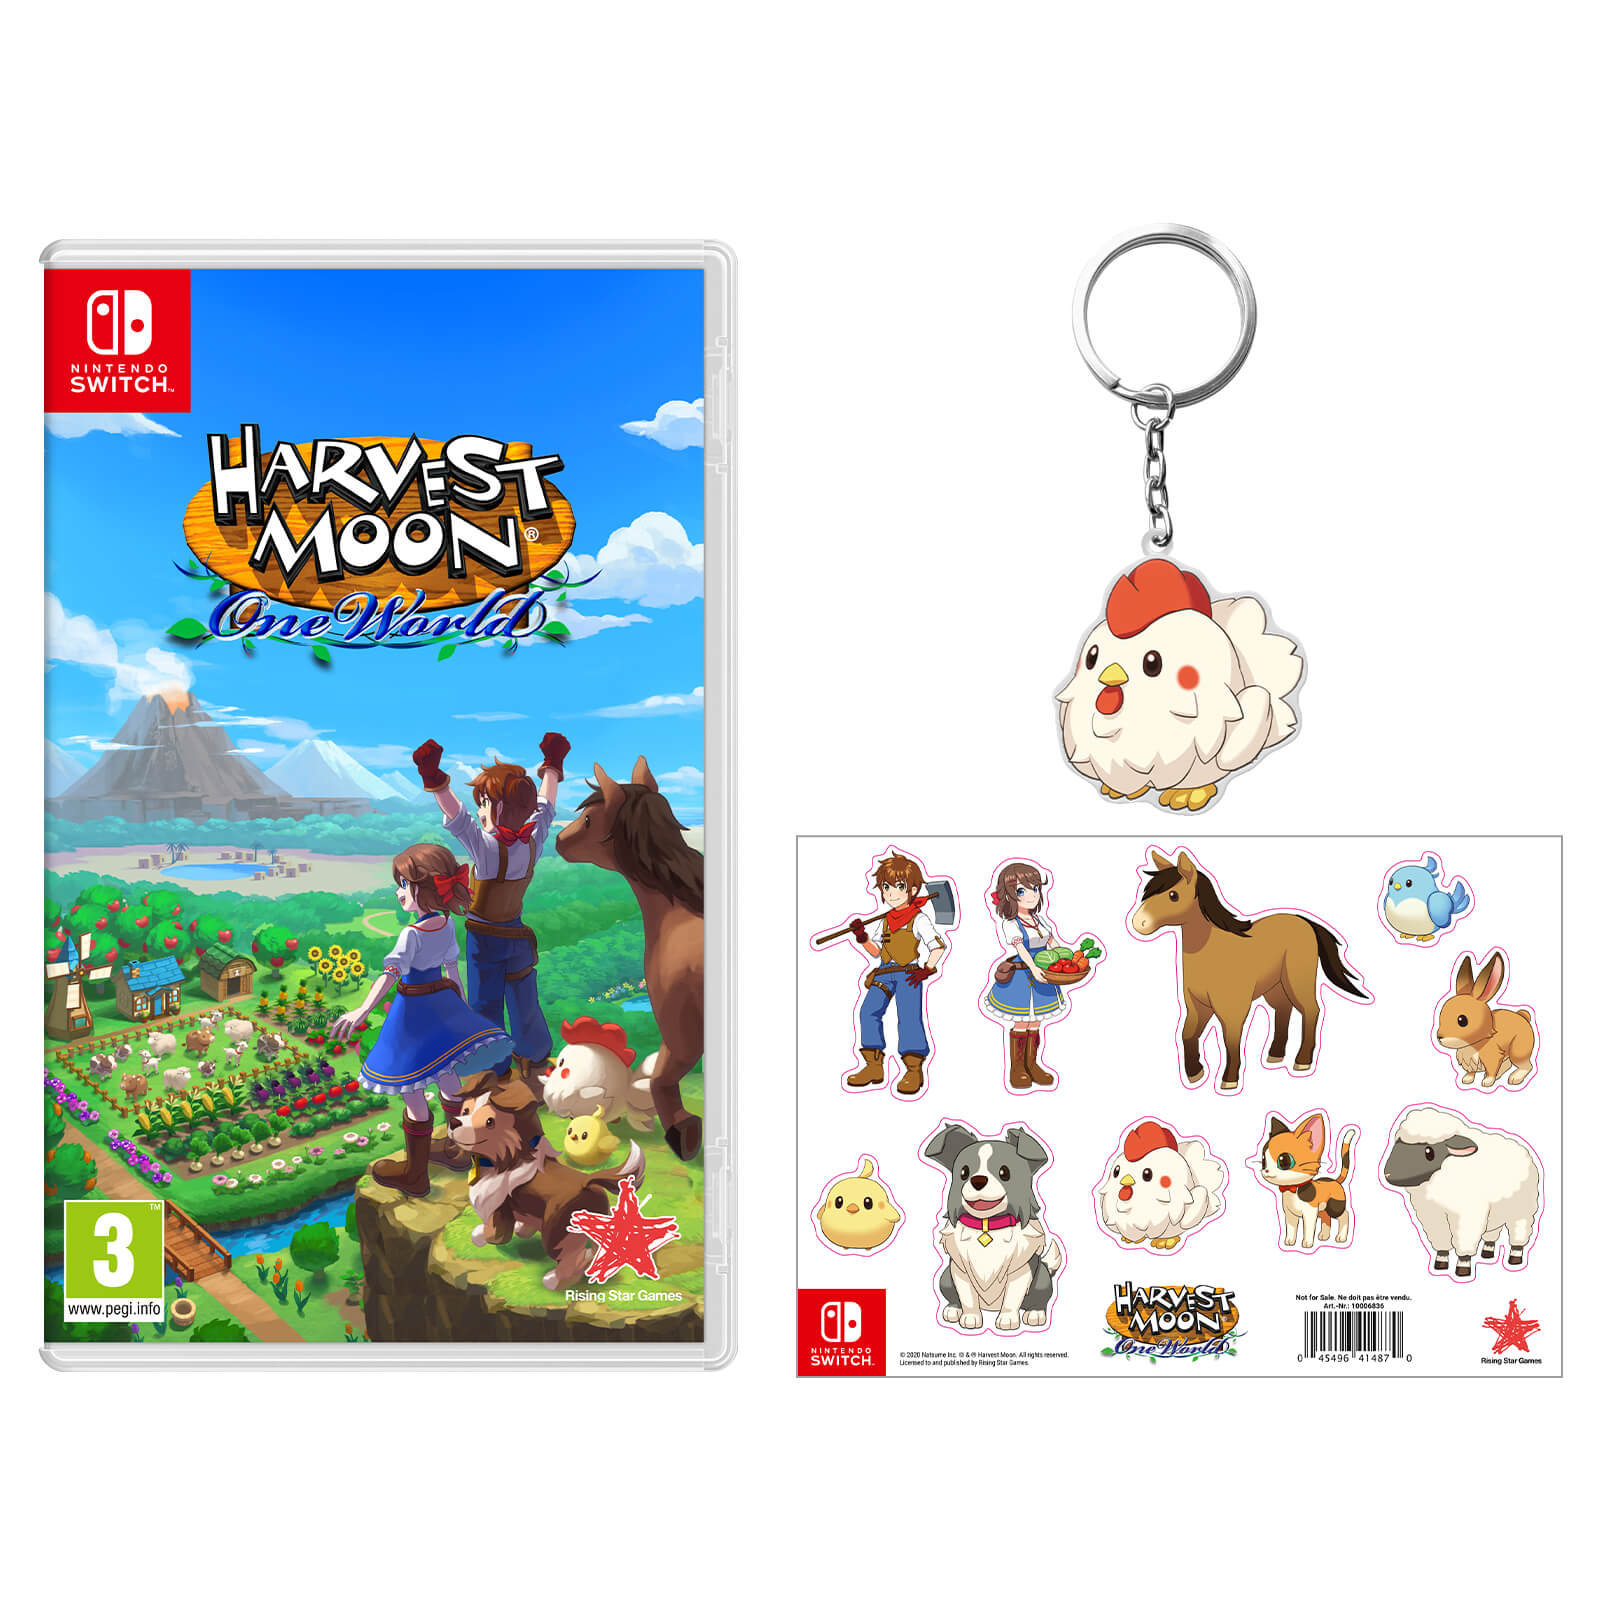 Pre-order Harvest Moon: One World on the Nintendo Official UK Store, get a  chicken keyring and sticker sheet